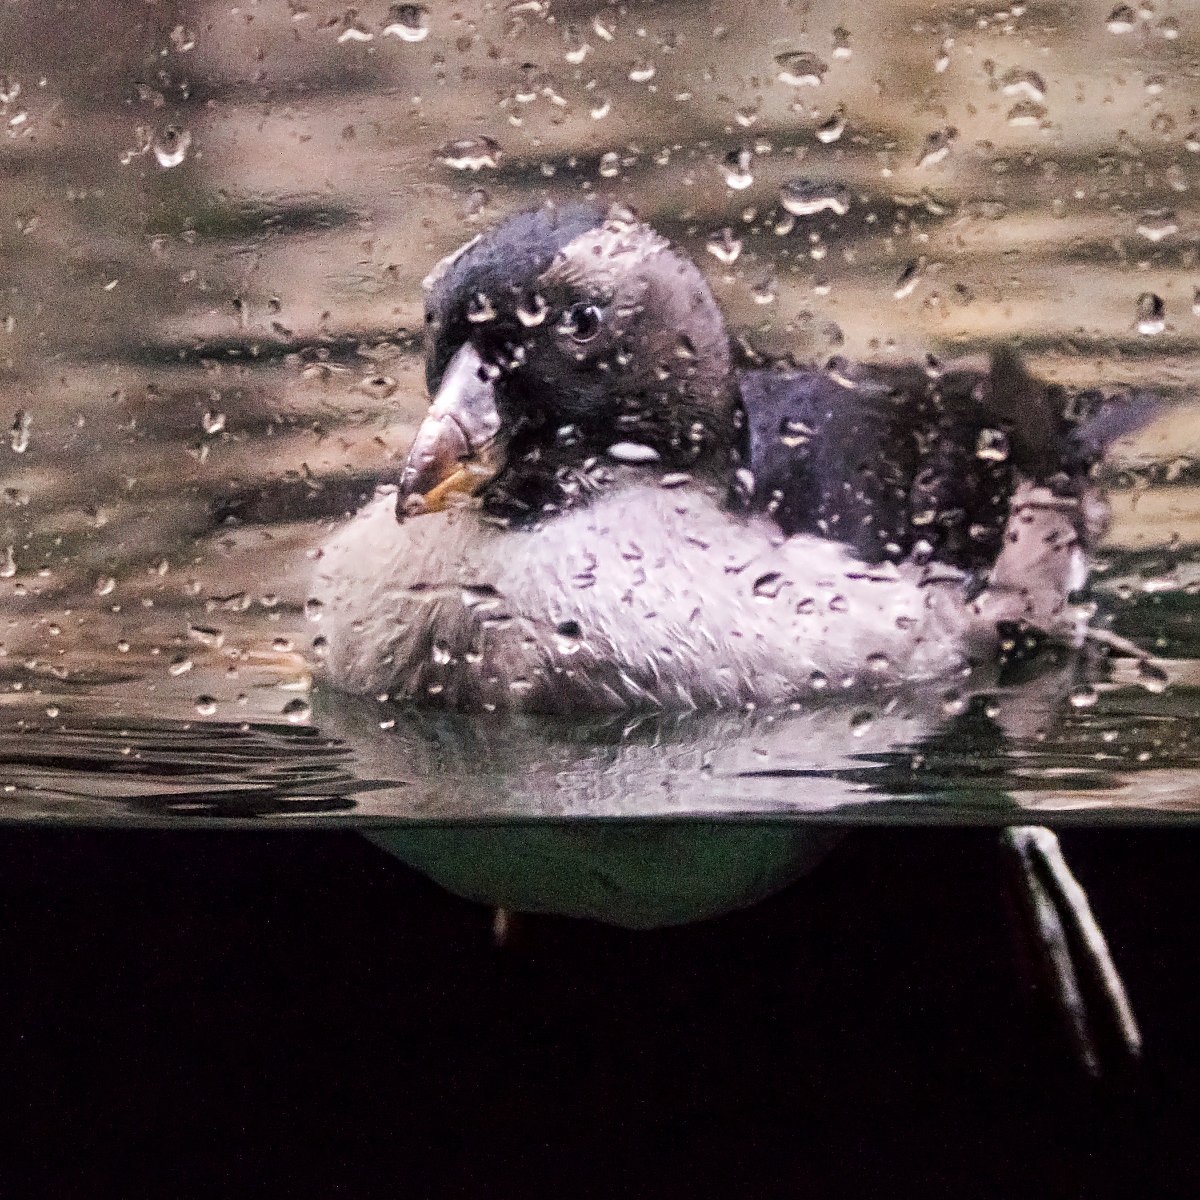 Tufted puffin chick after fledging swimming in the Aquarium